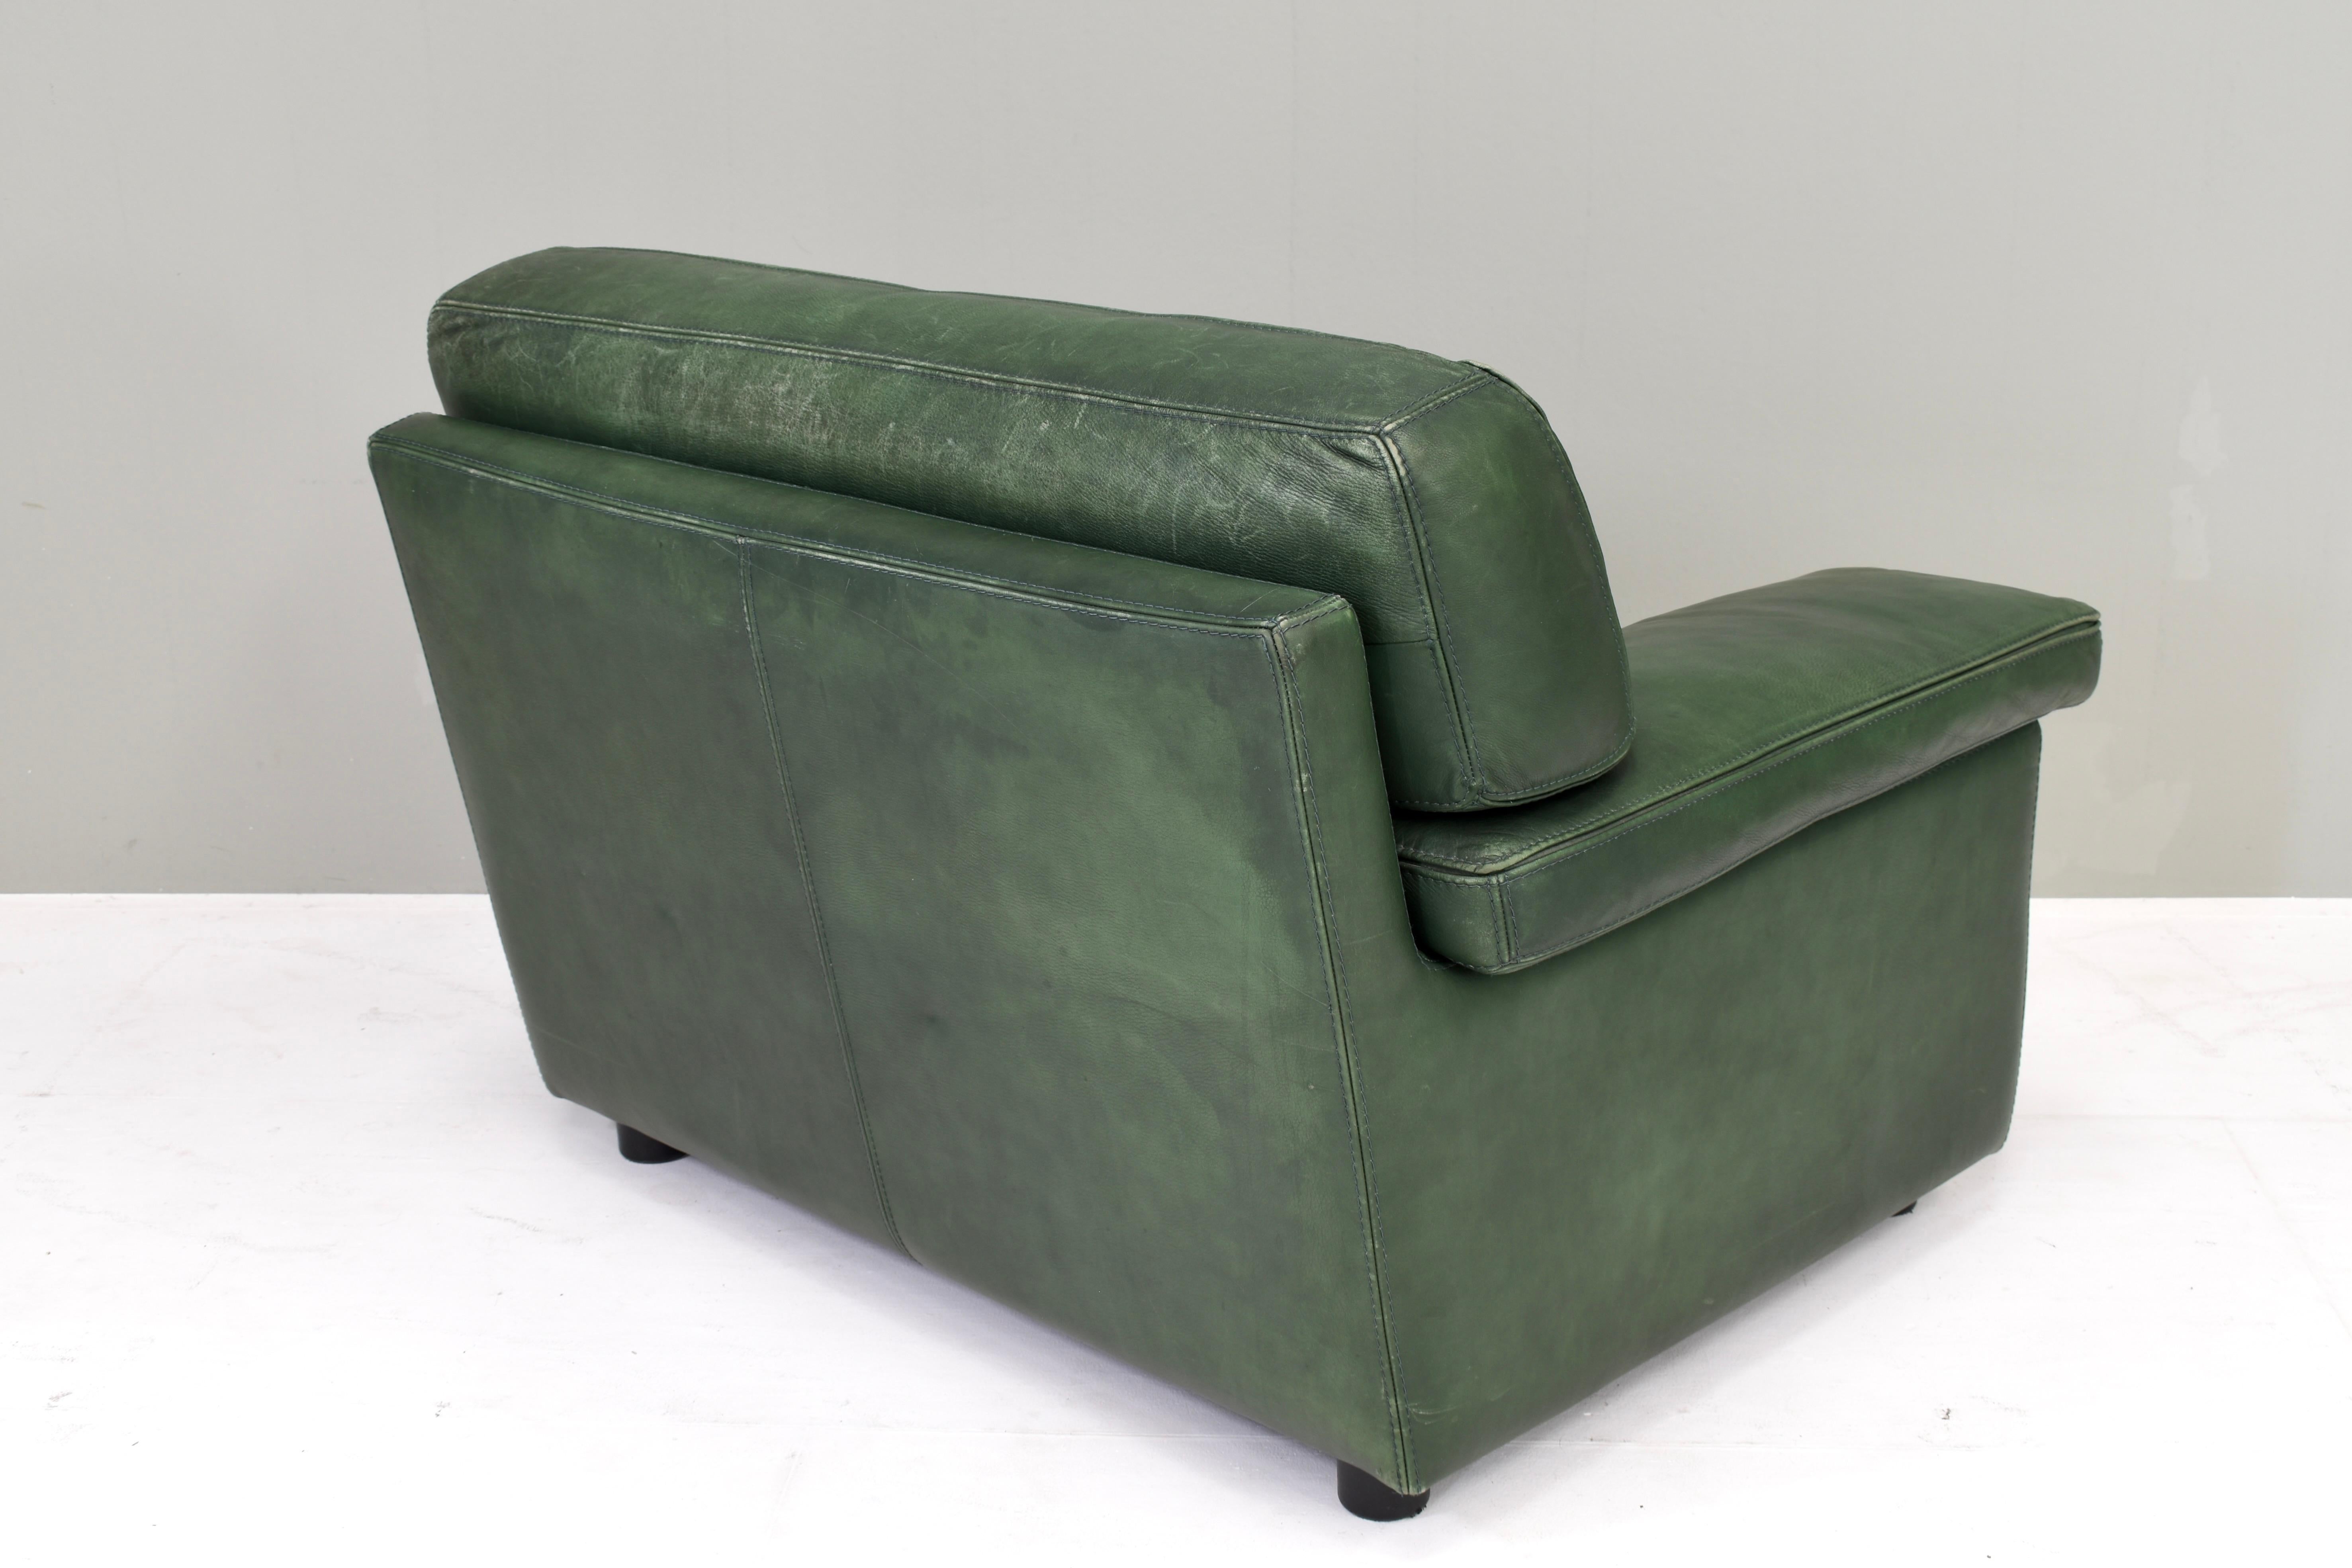 Roche Bobois Lounge Armchair in Original Green Patinated Leather – circa 1970 For Sale 7